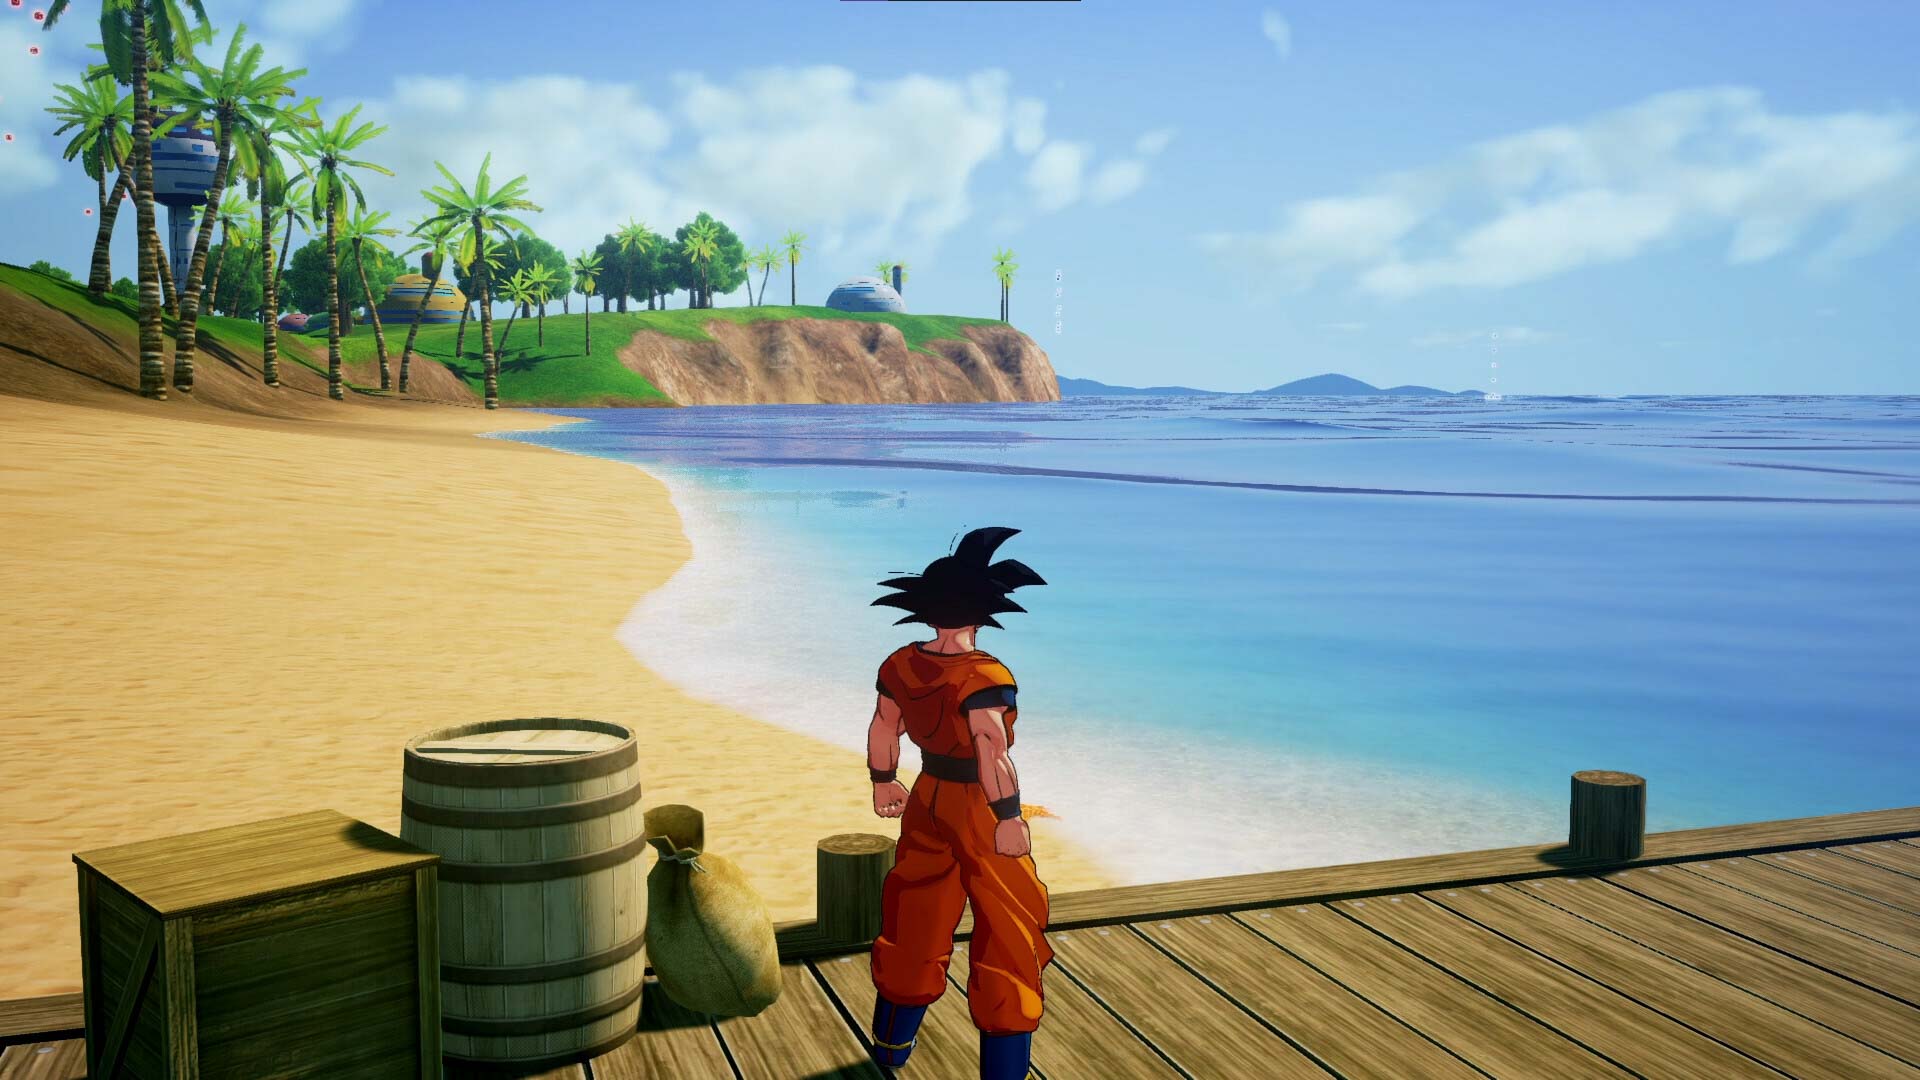 Dragon Ball Z: Kakarot isn’t a great game, and it doesn’t need to be